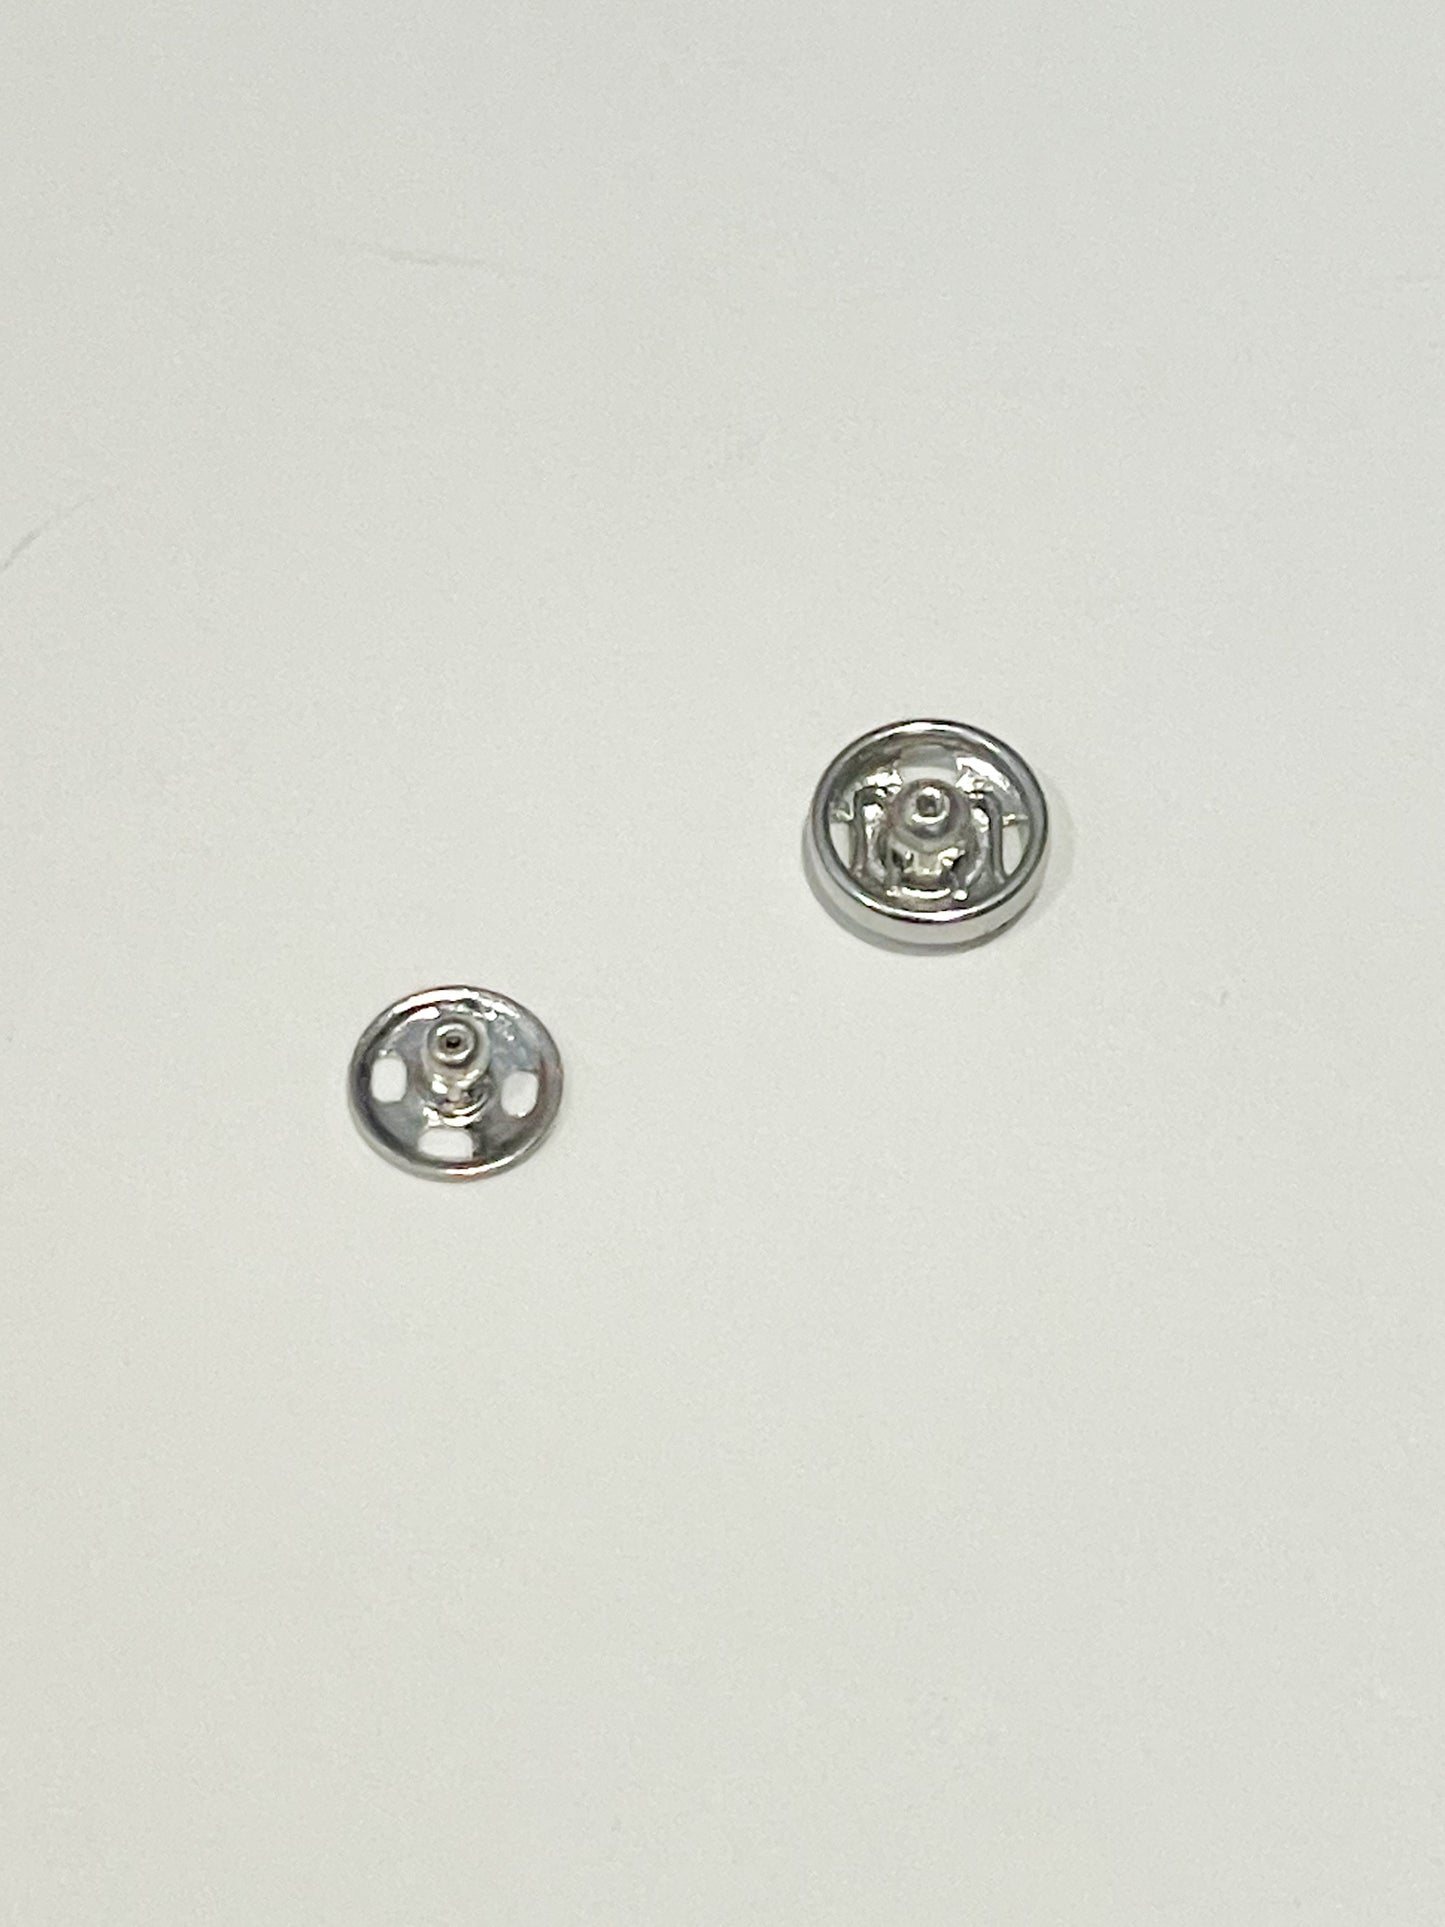 Small Sew-on Silver Metal Snap Fasteners